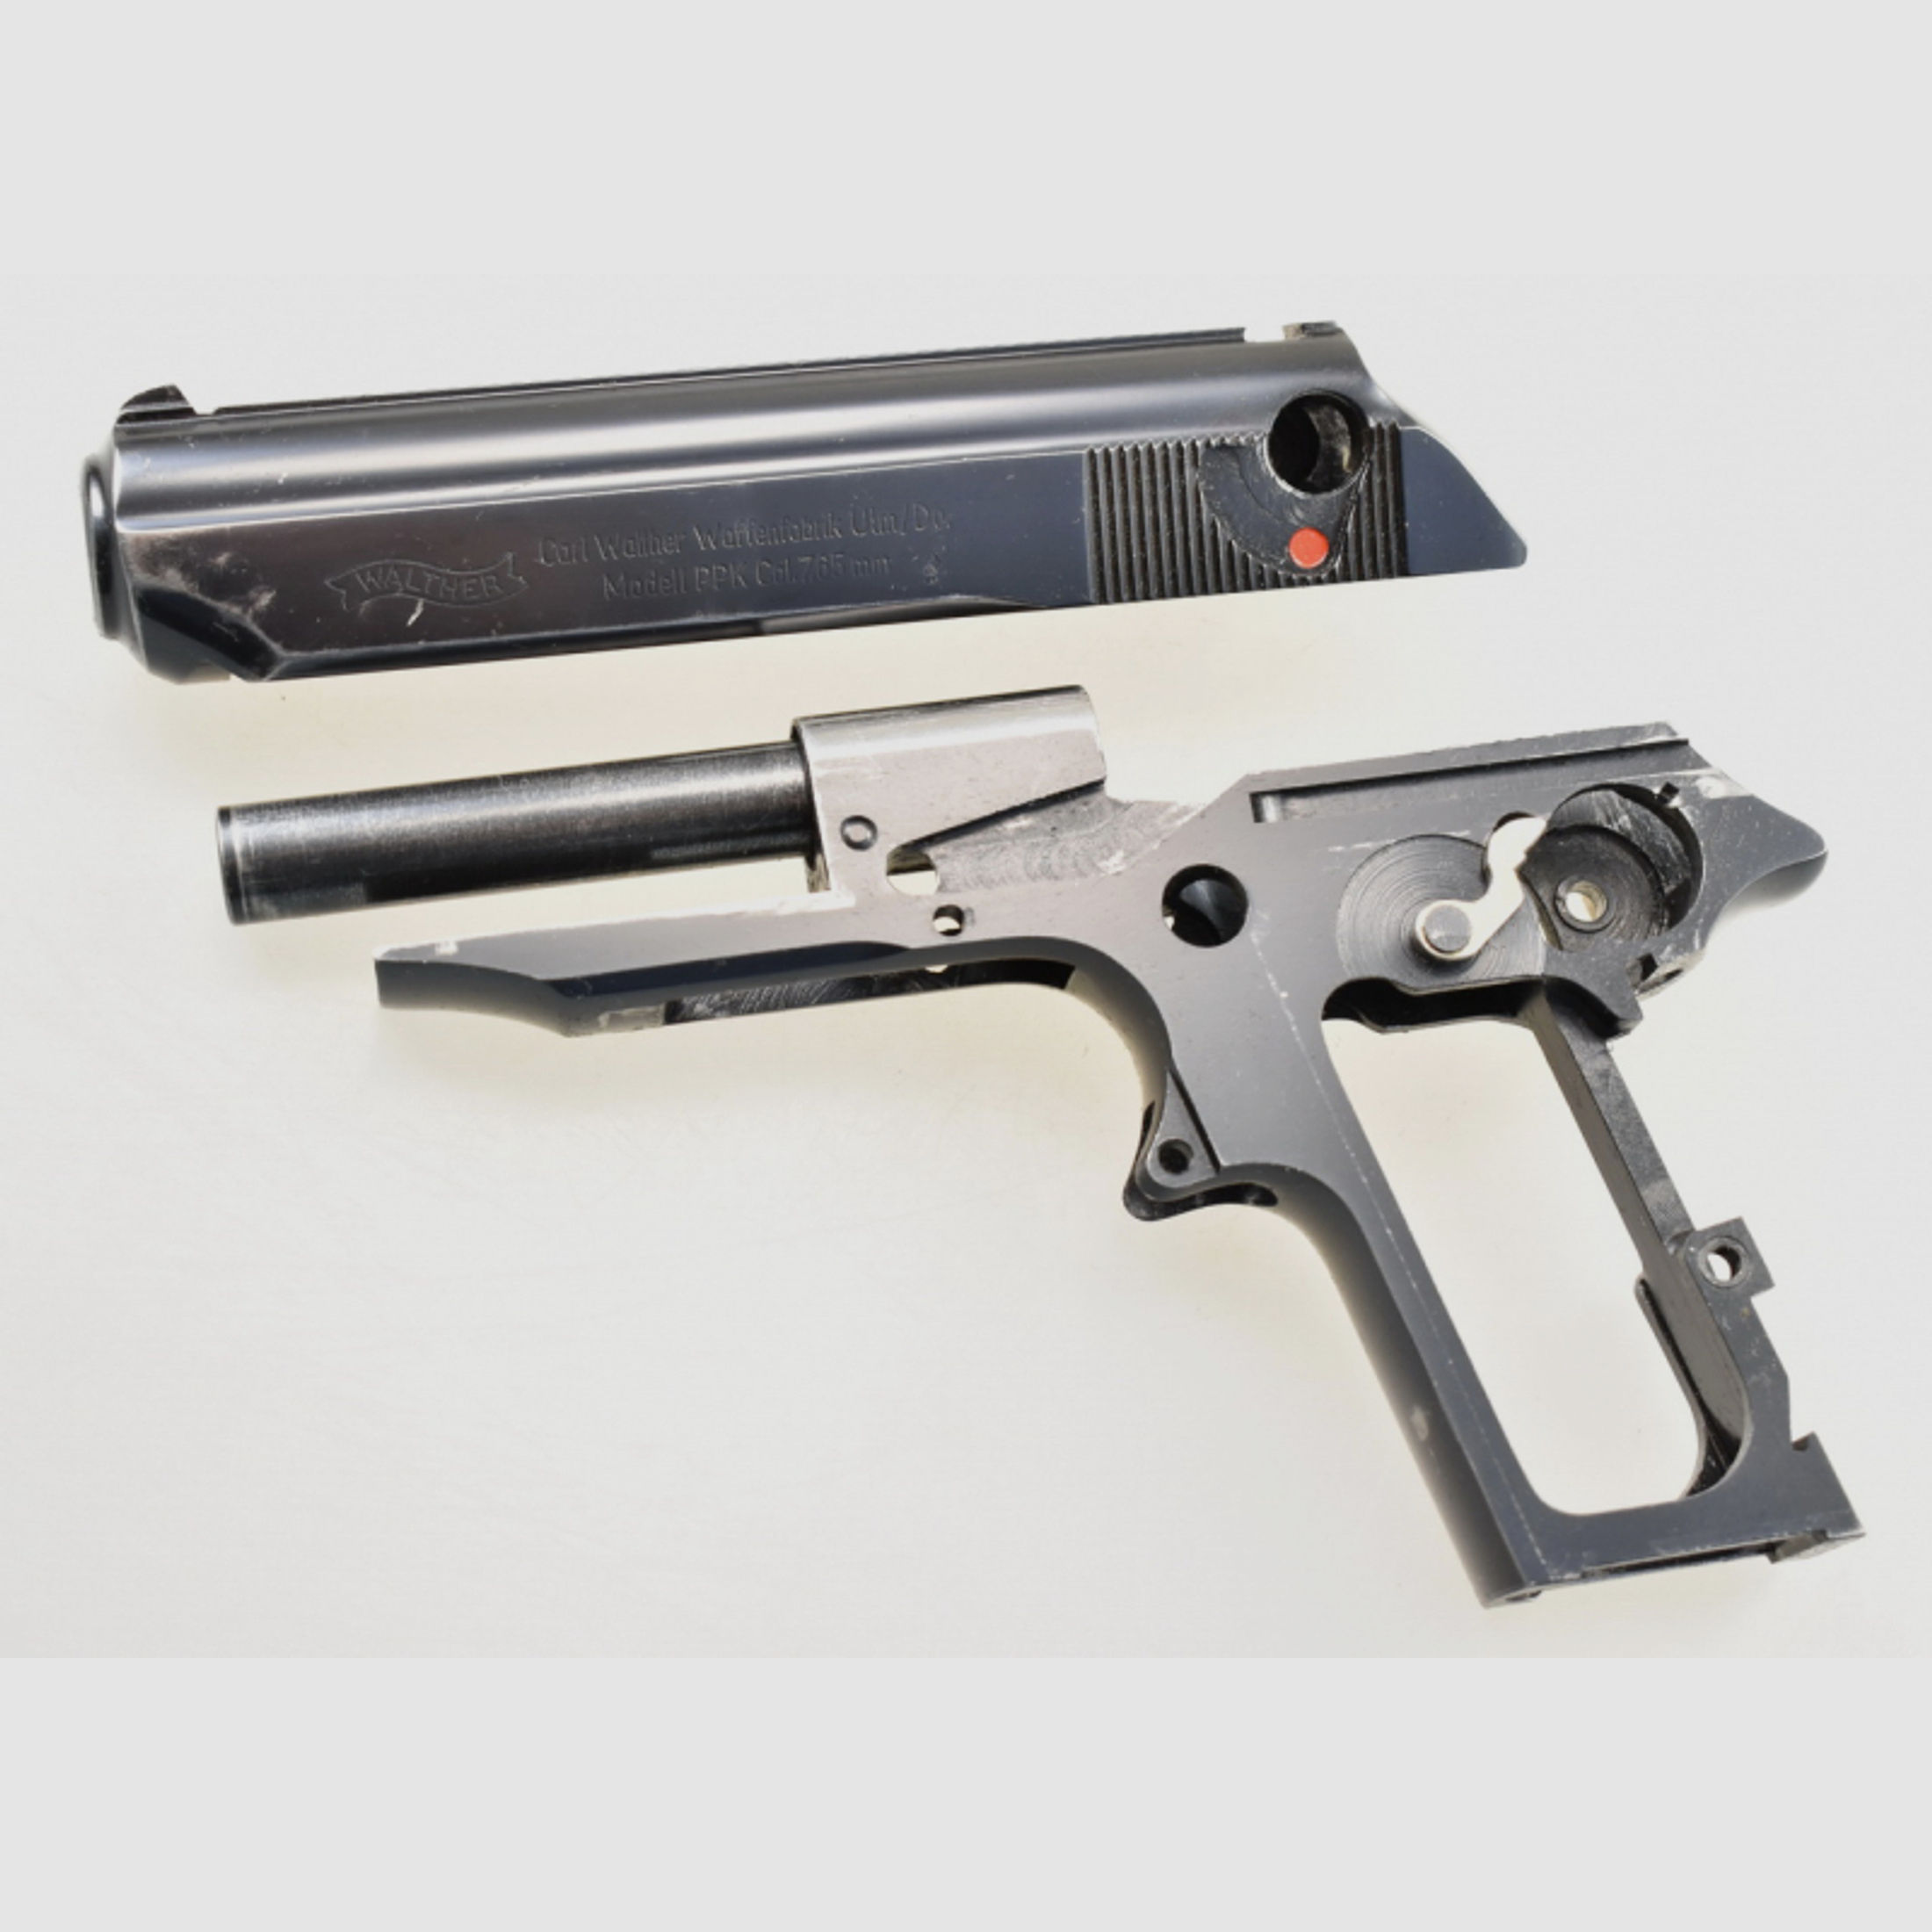 WALTHER / ULM Pistole Modell PPK im Kaliber 7,65mm Browning